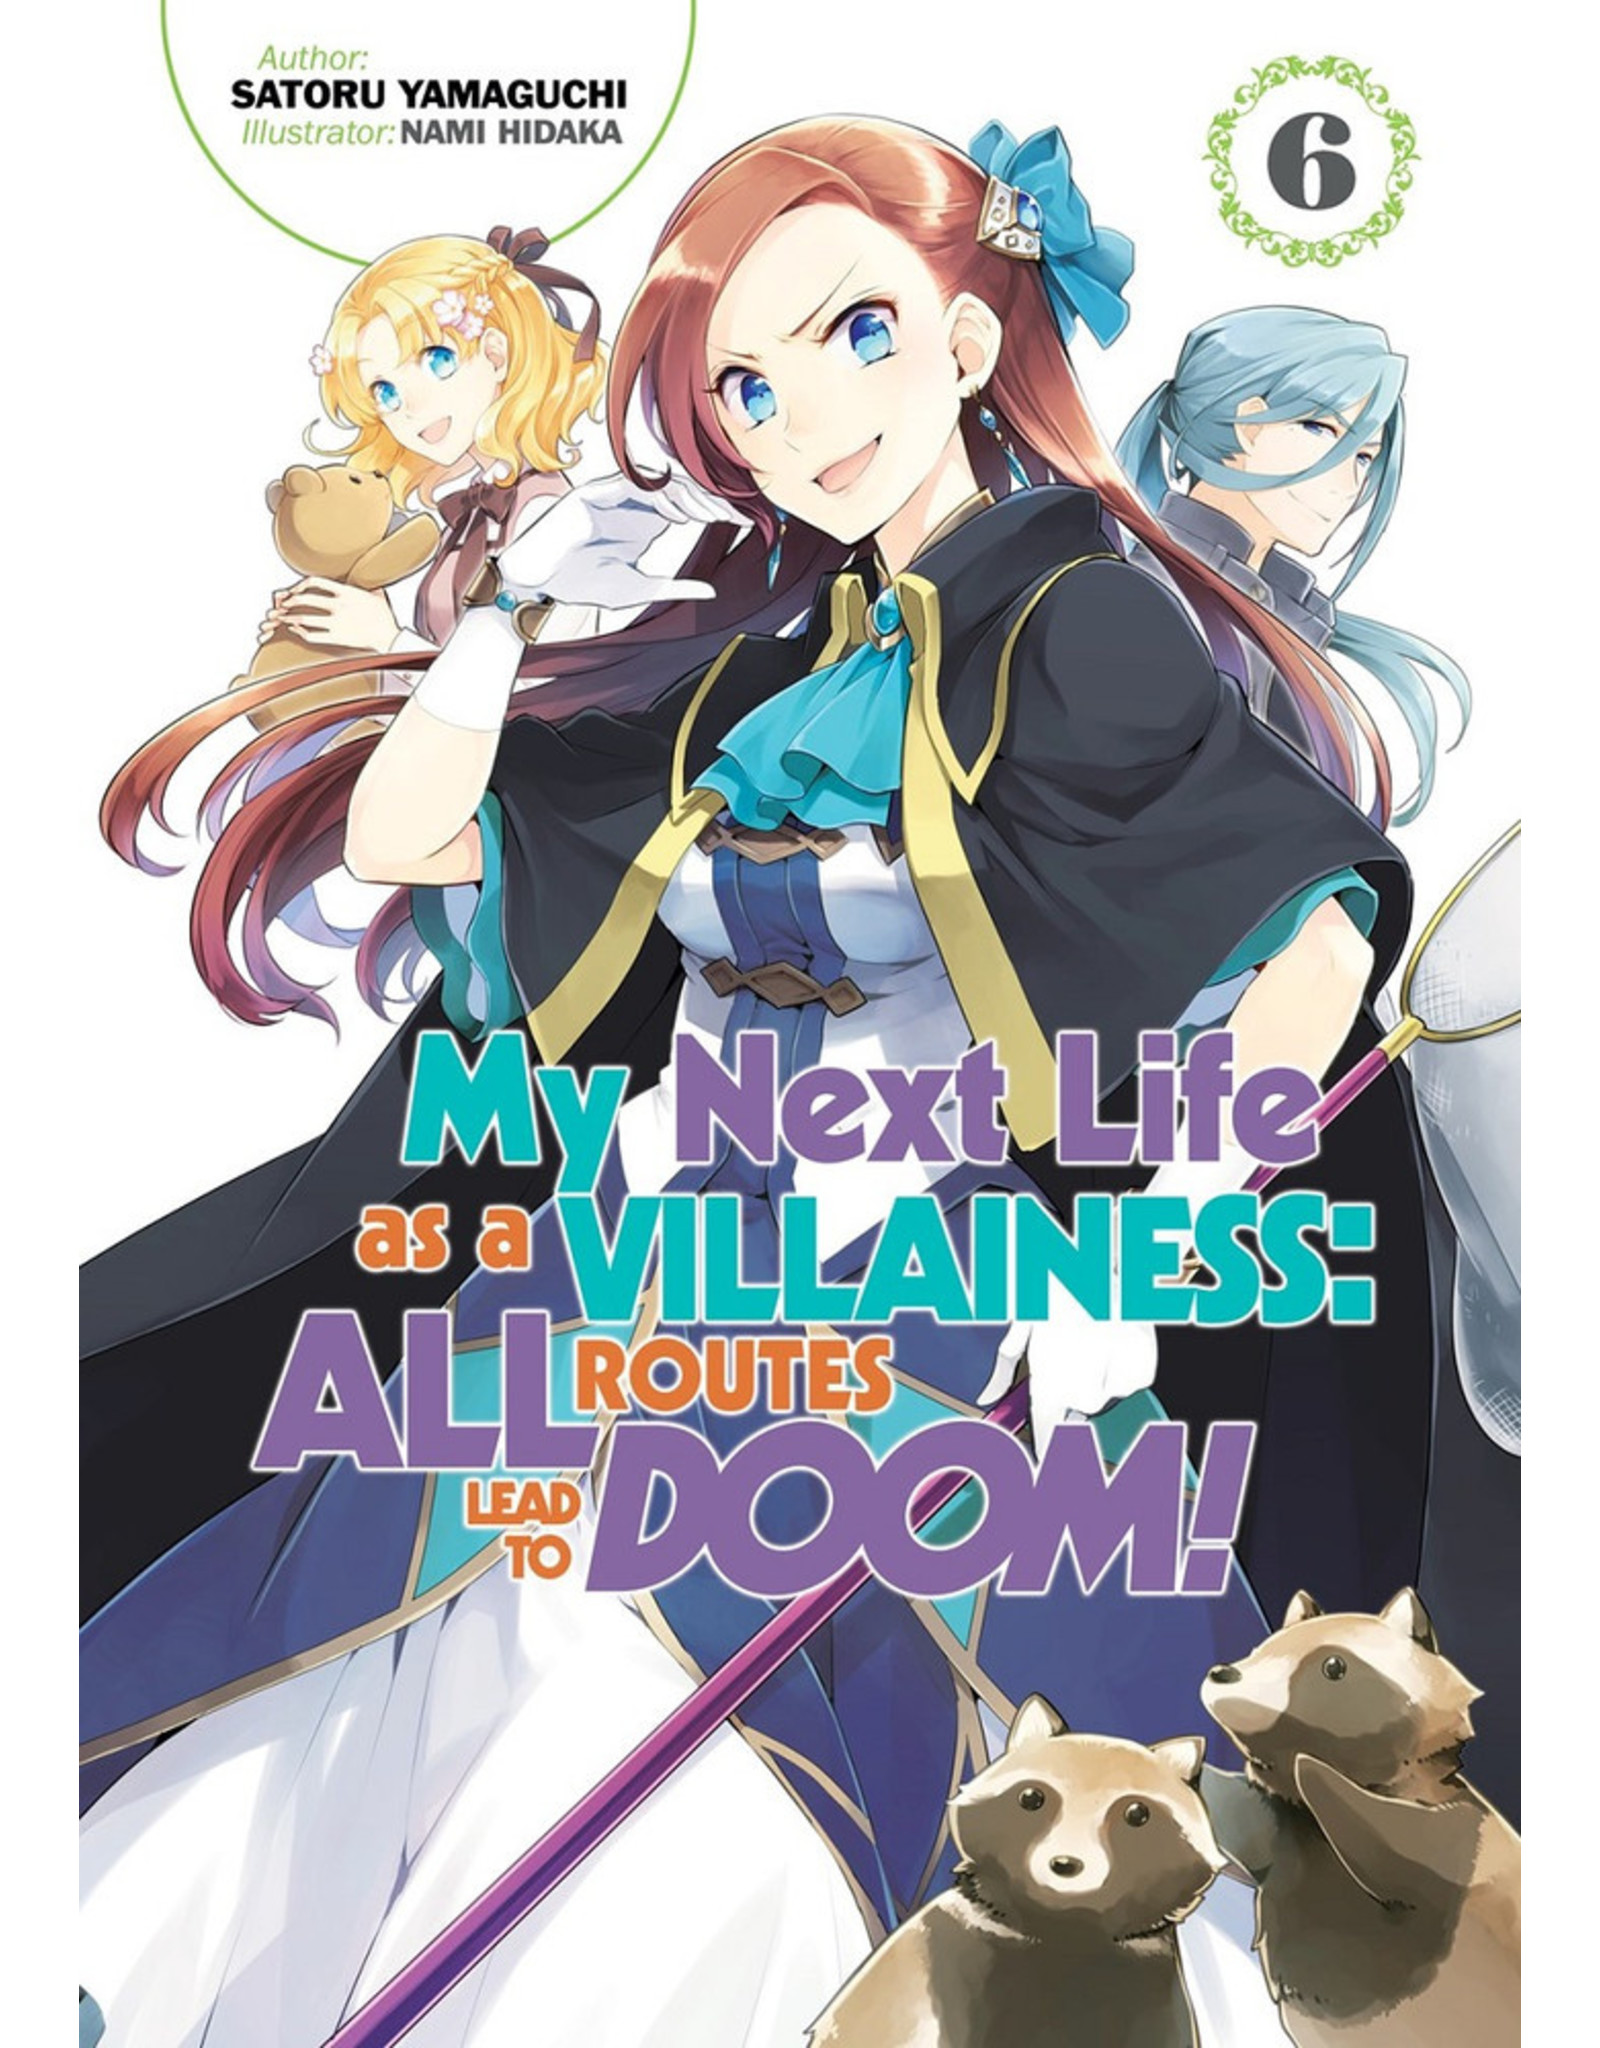 My Next Life As A Villainess: All Routes Lead To Doom! Vol. 6 Novel